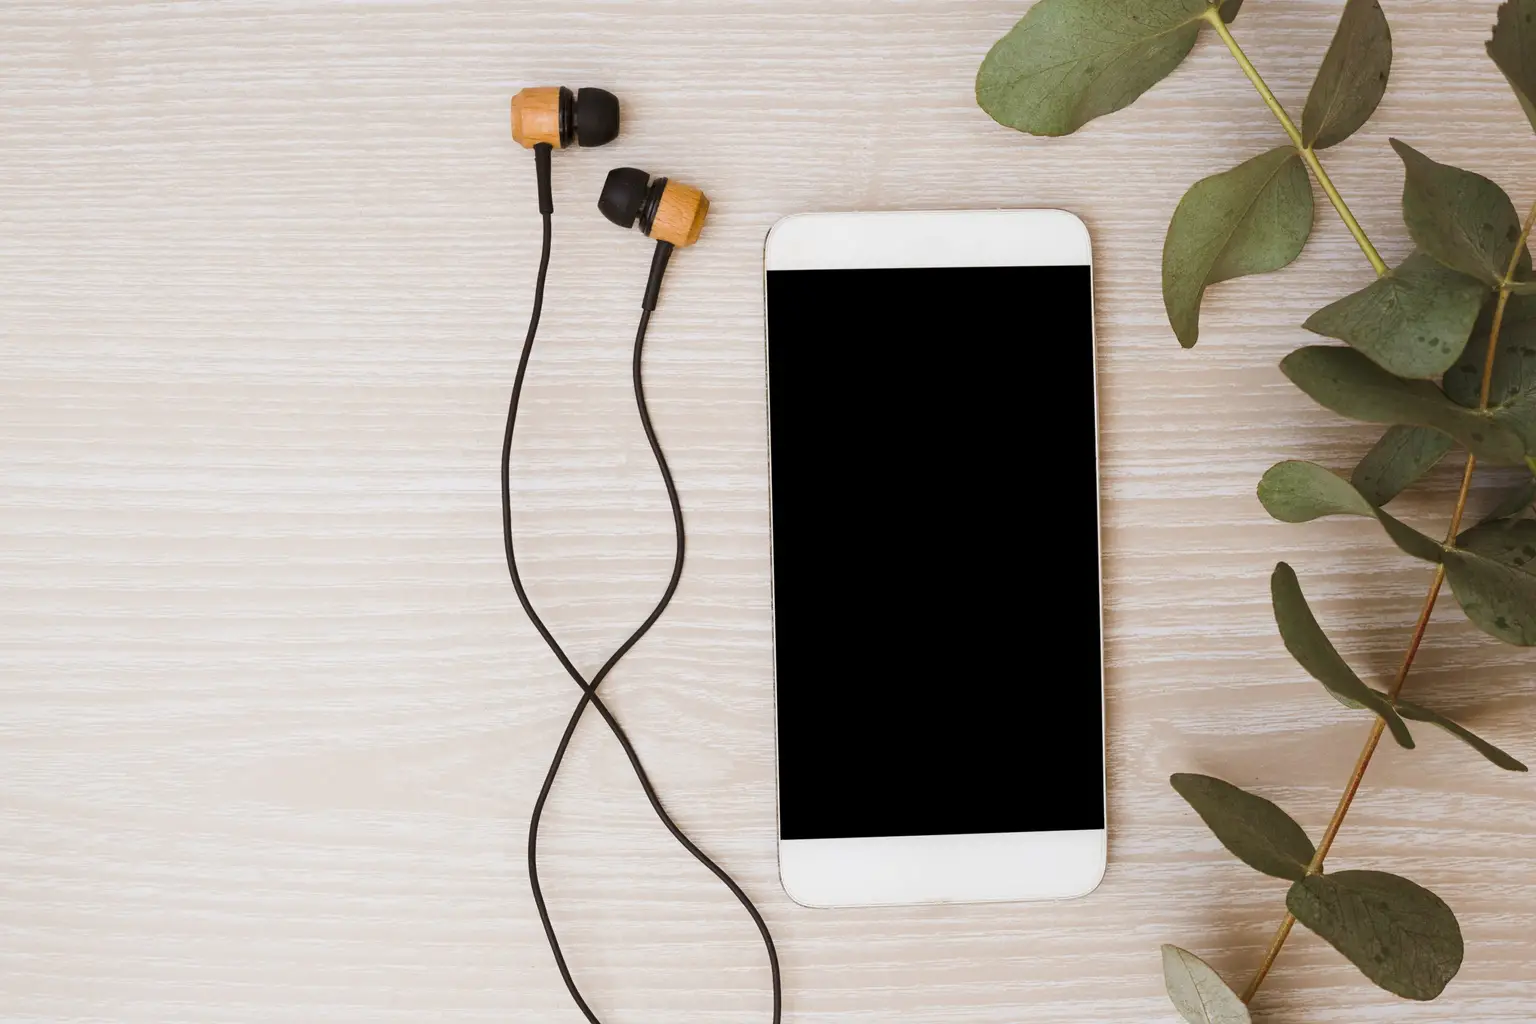 earphone-mobile-phone-and-leaves-on-wooden-background